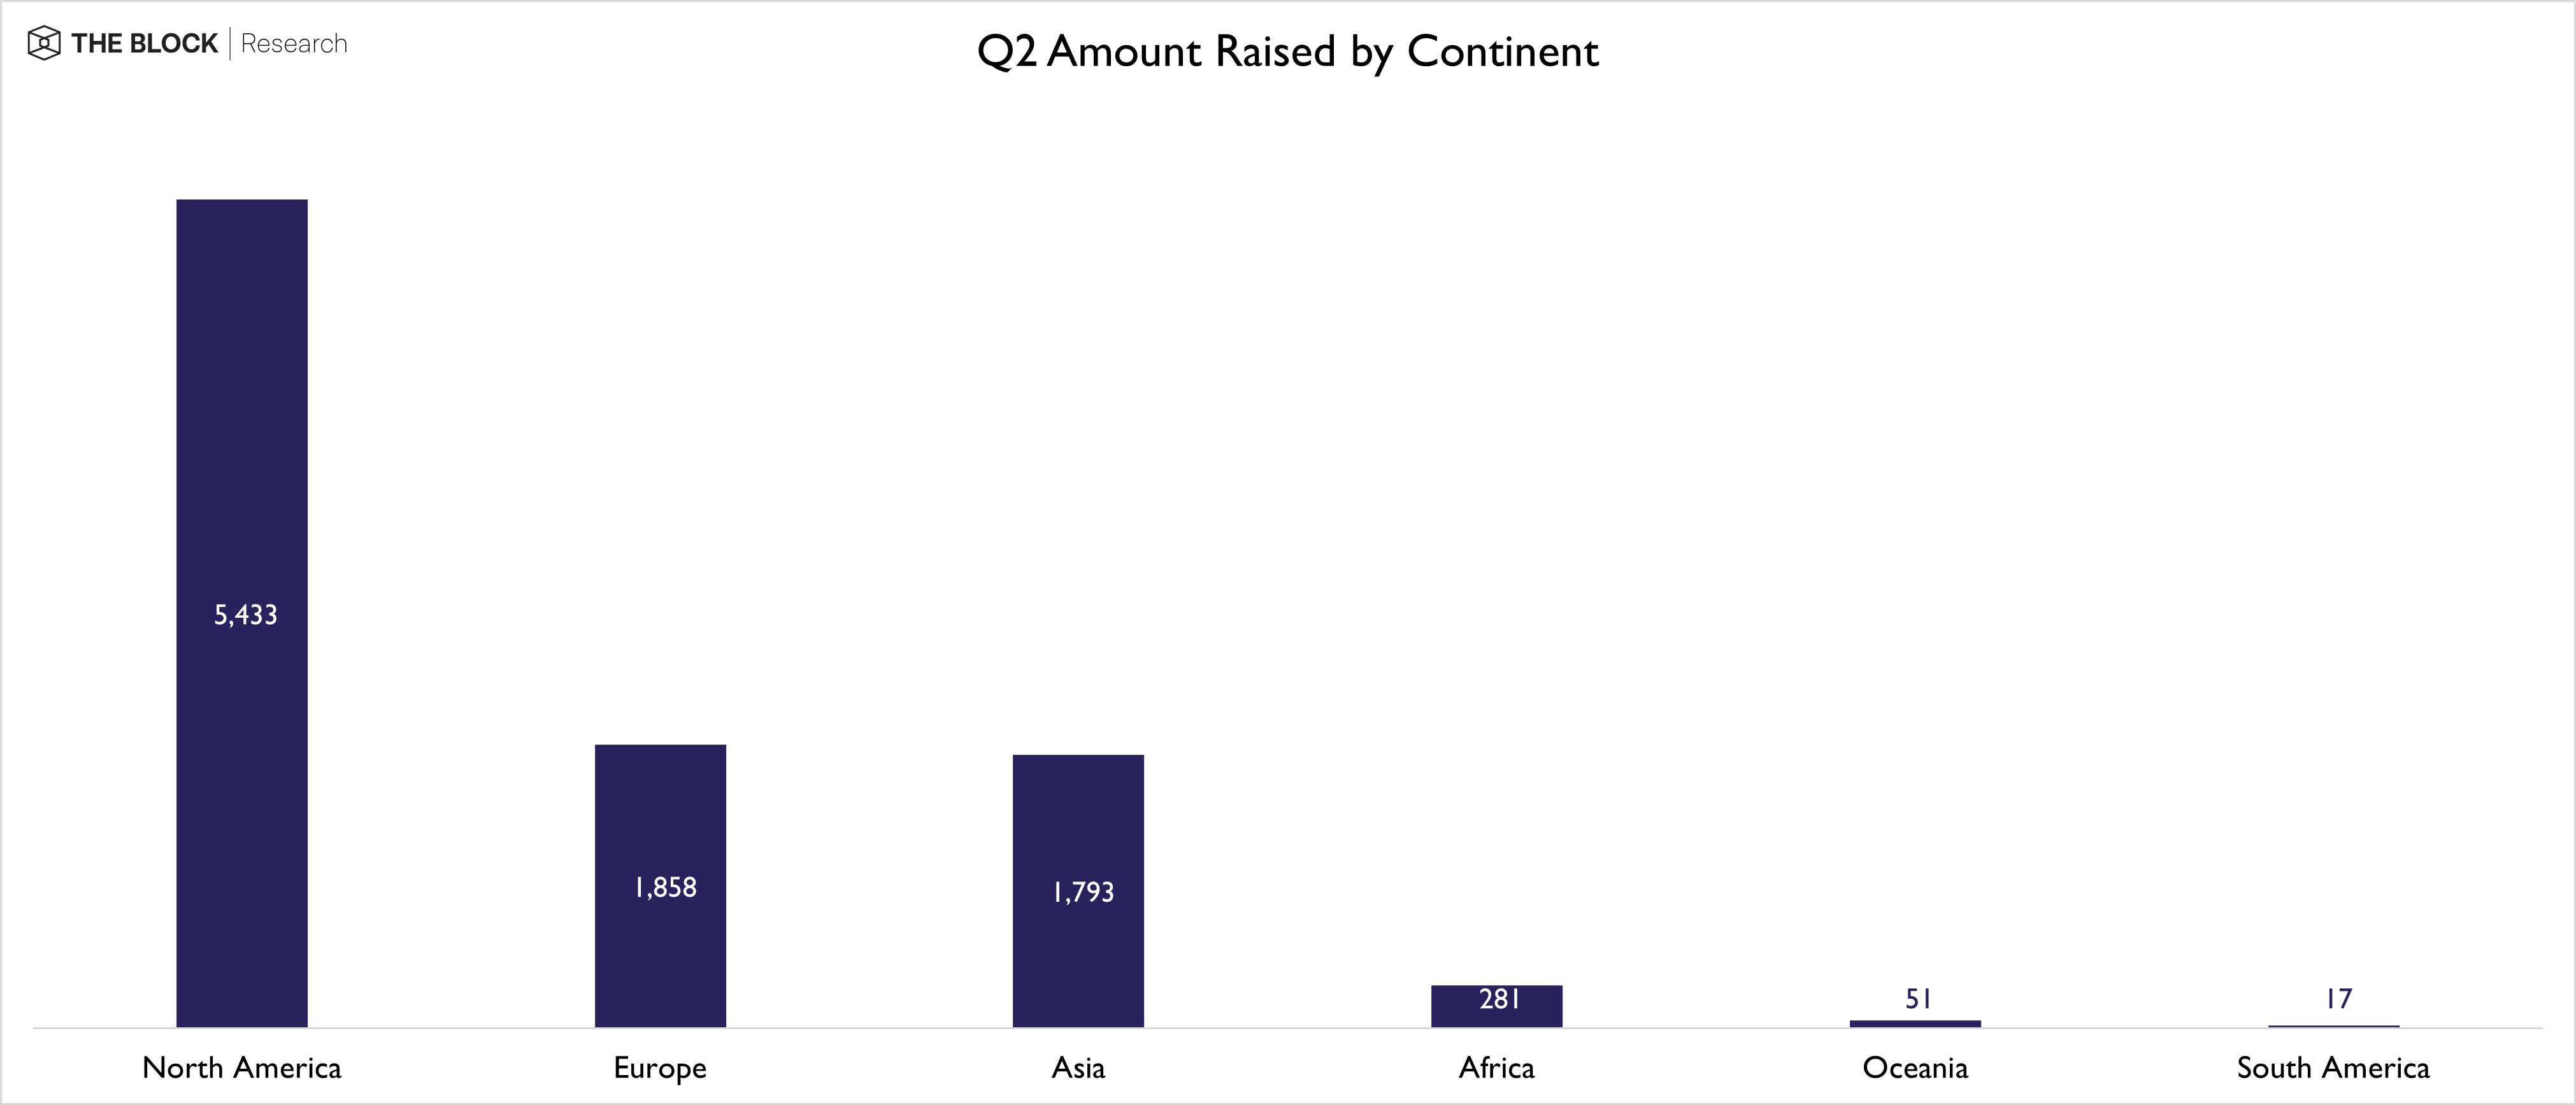 Amount raised by continent in the second quarter from The Block Research